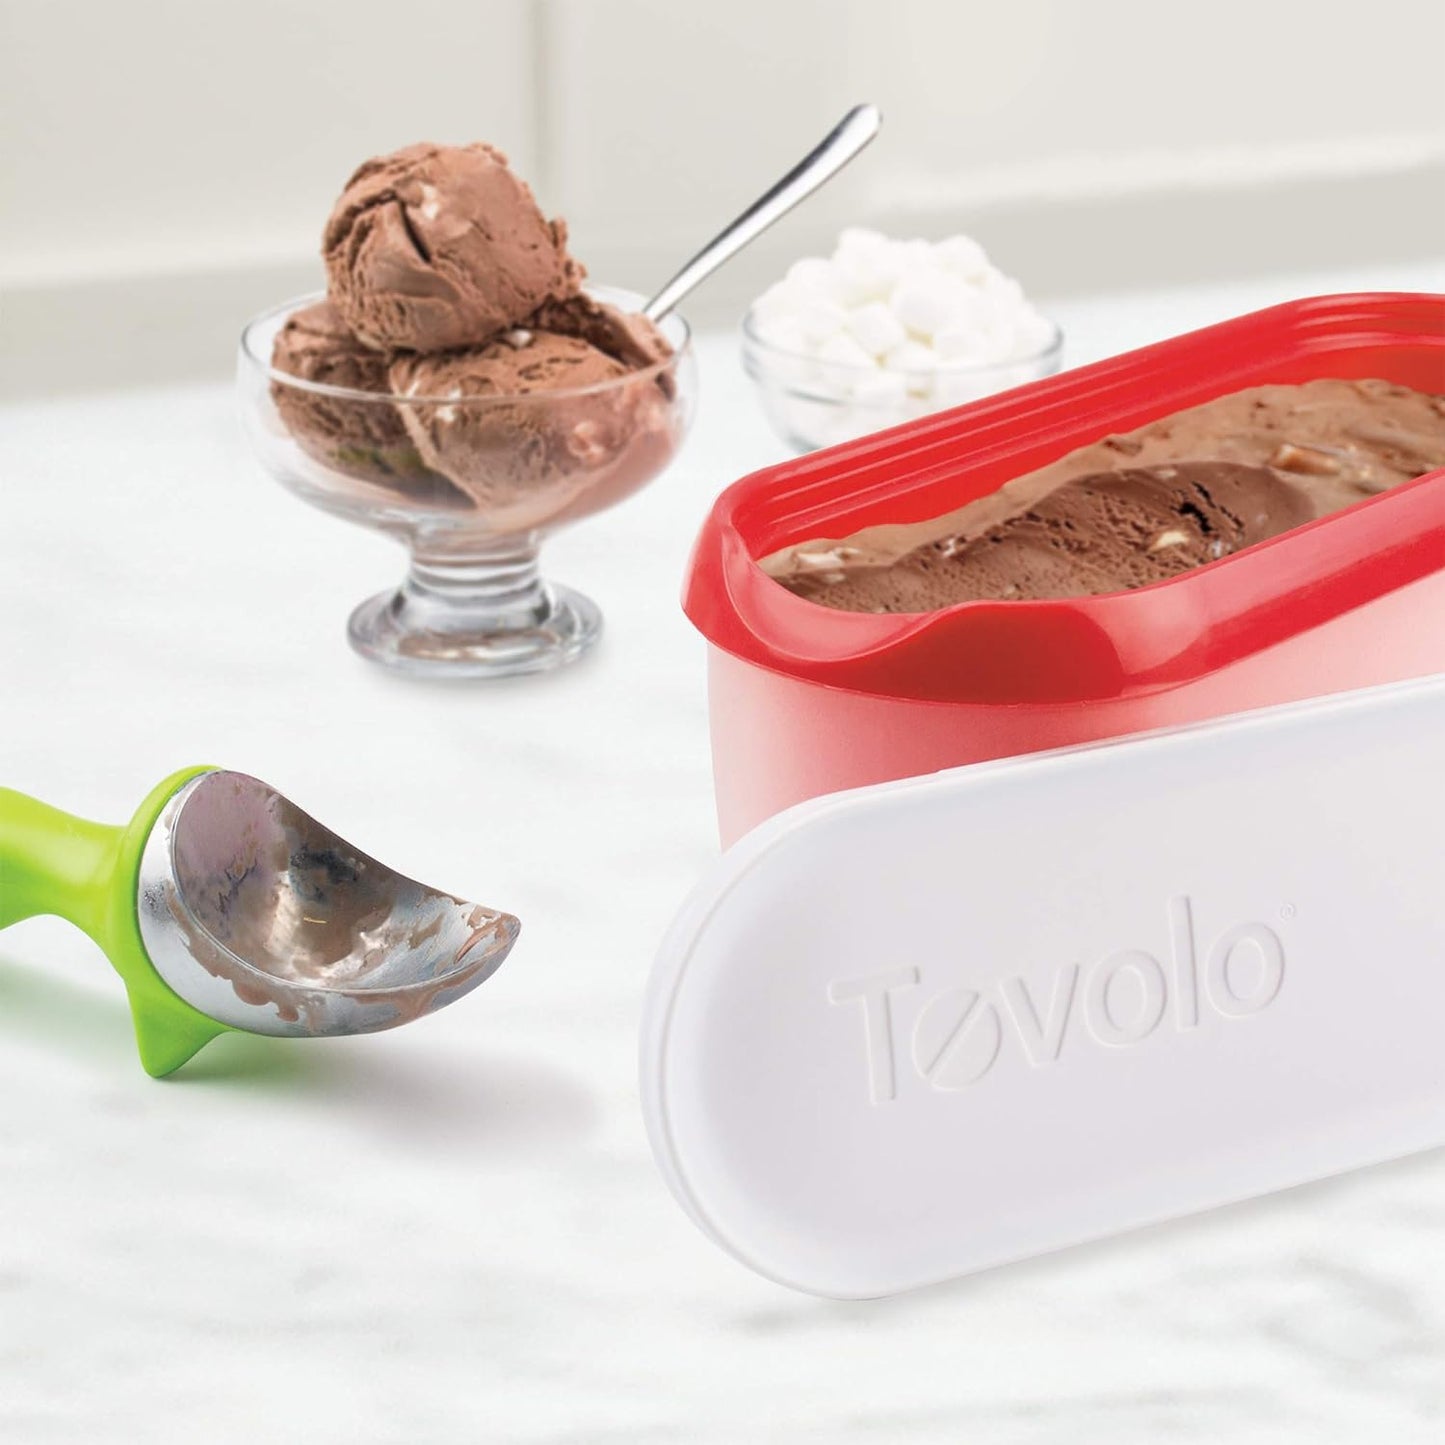 Tovolo Glide-A-Scoop Ice Cream Bucket Reusable Container,with Non-Slip Base,Stackable on Freezing Rack,No Bisphenol A,1.5 Quart,Strawberry Ice Cream